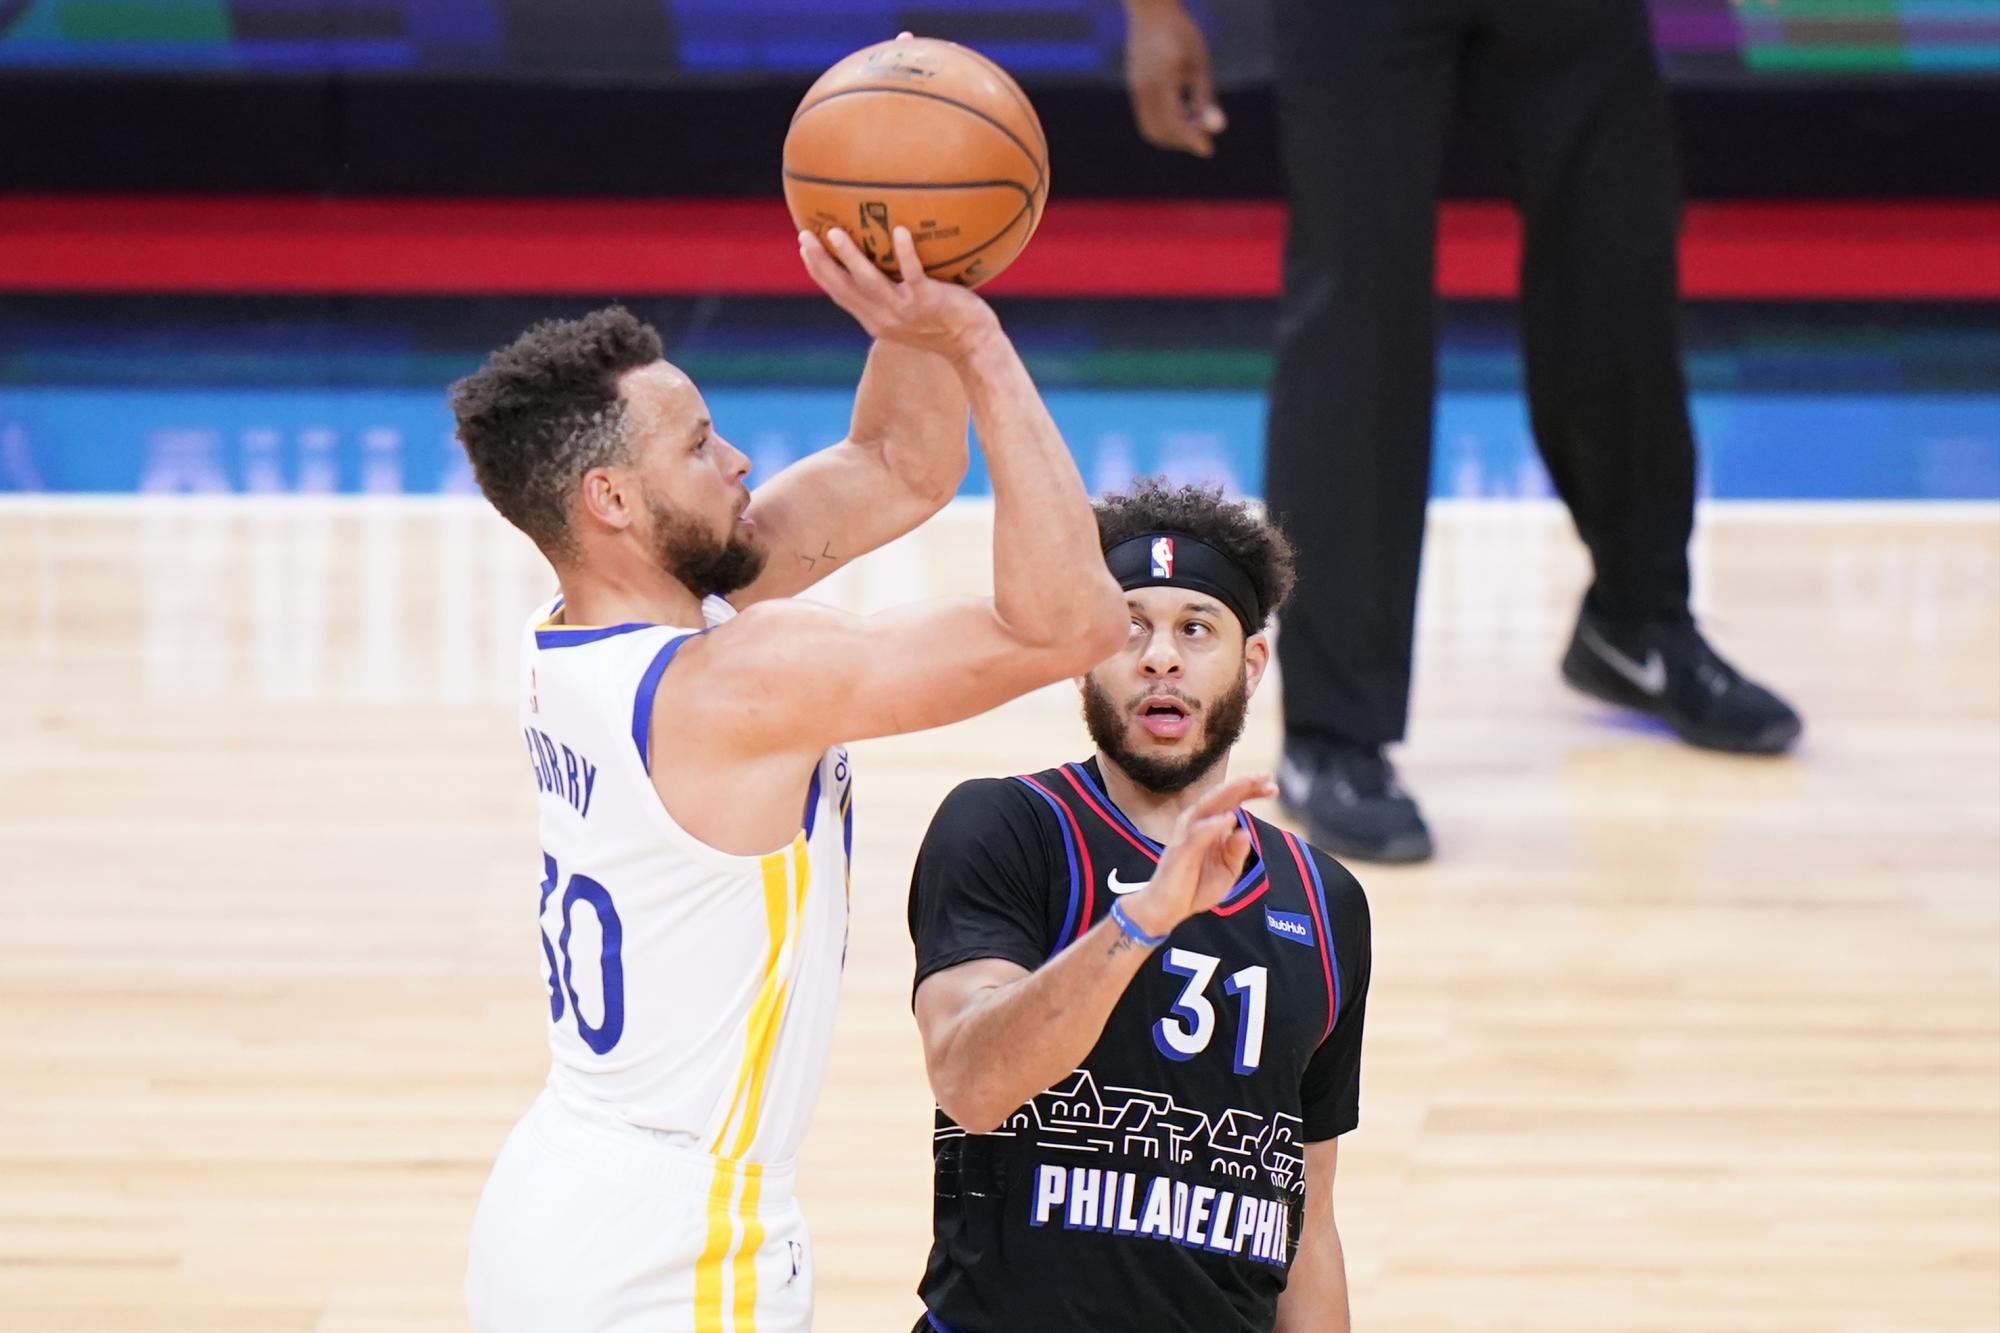 Stephen Curry leads Kobe Bryant, while the Warriors defeat the 76ers